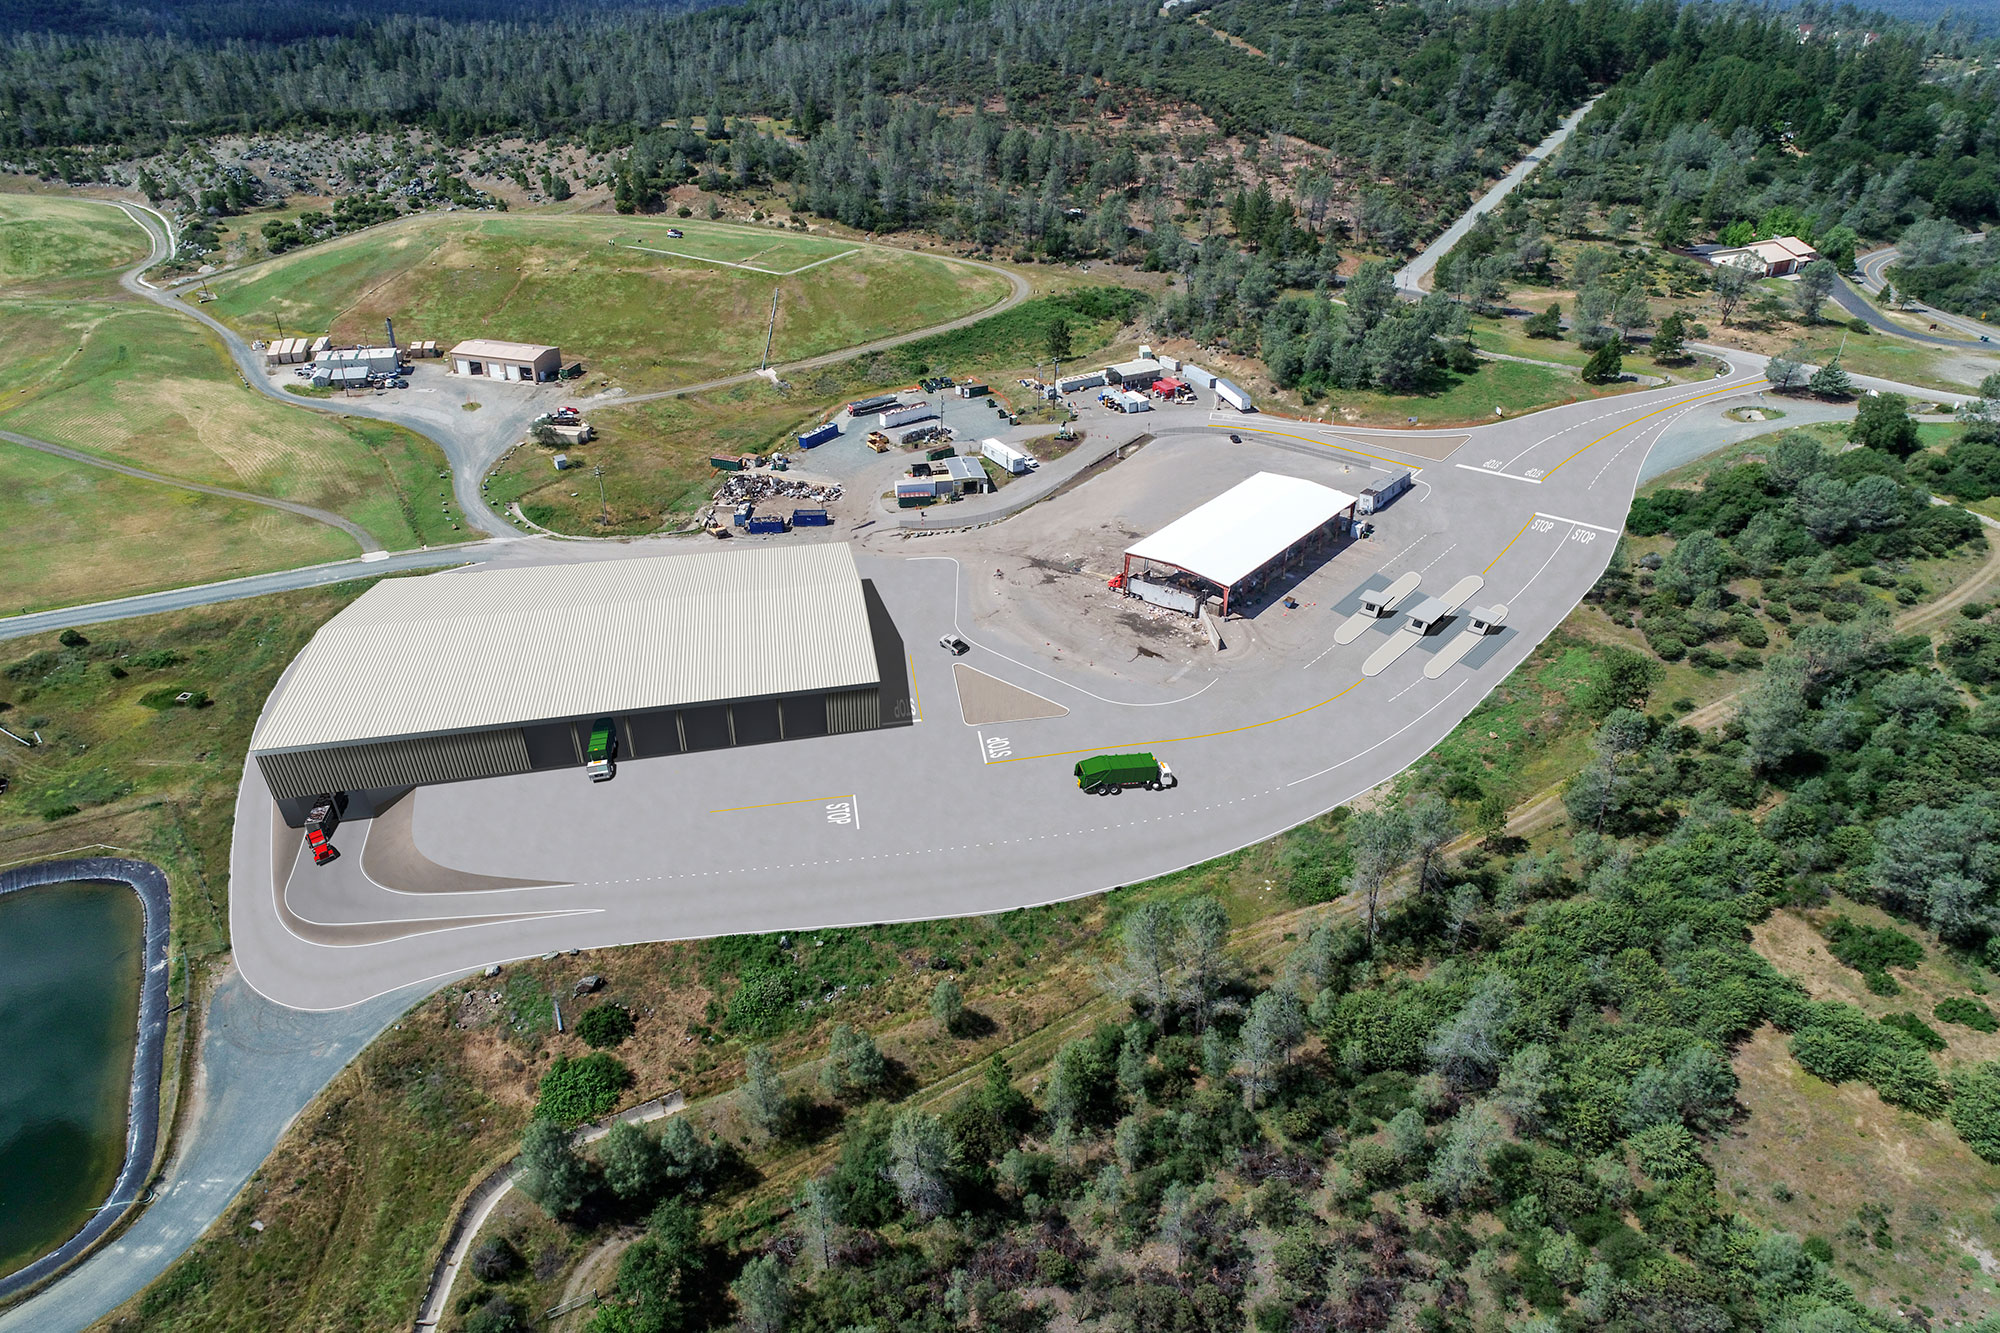 An aerial view shows the back side of the building how trucks can easily access the main road